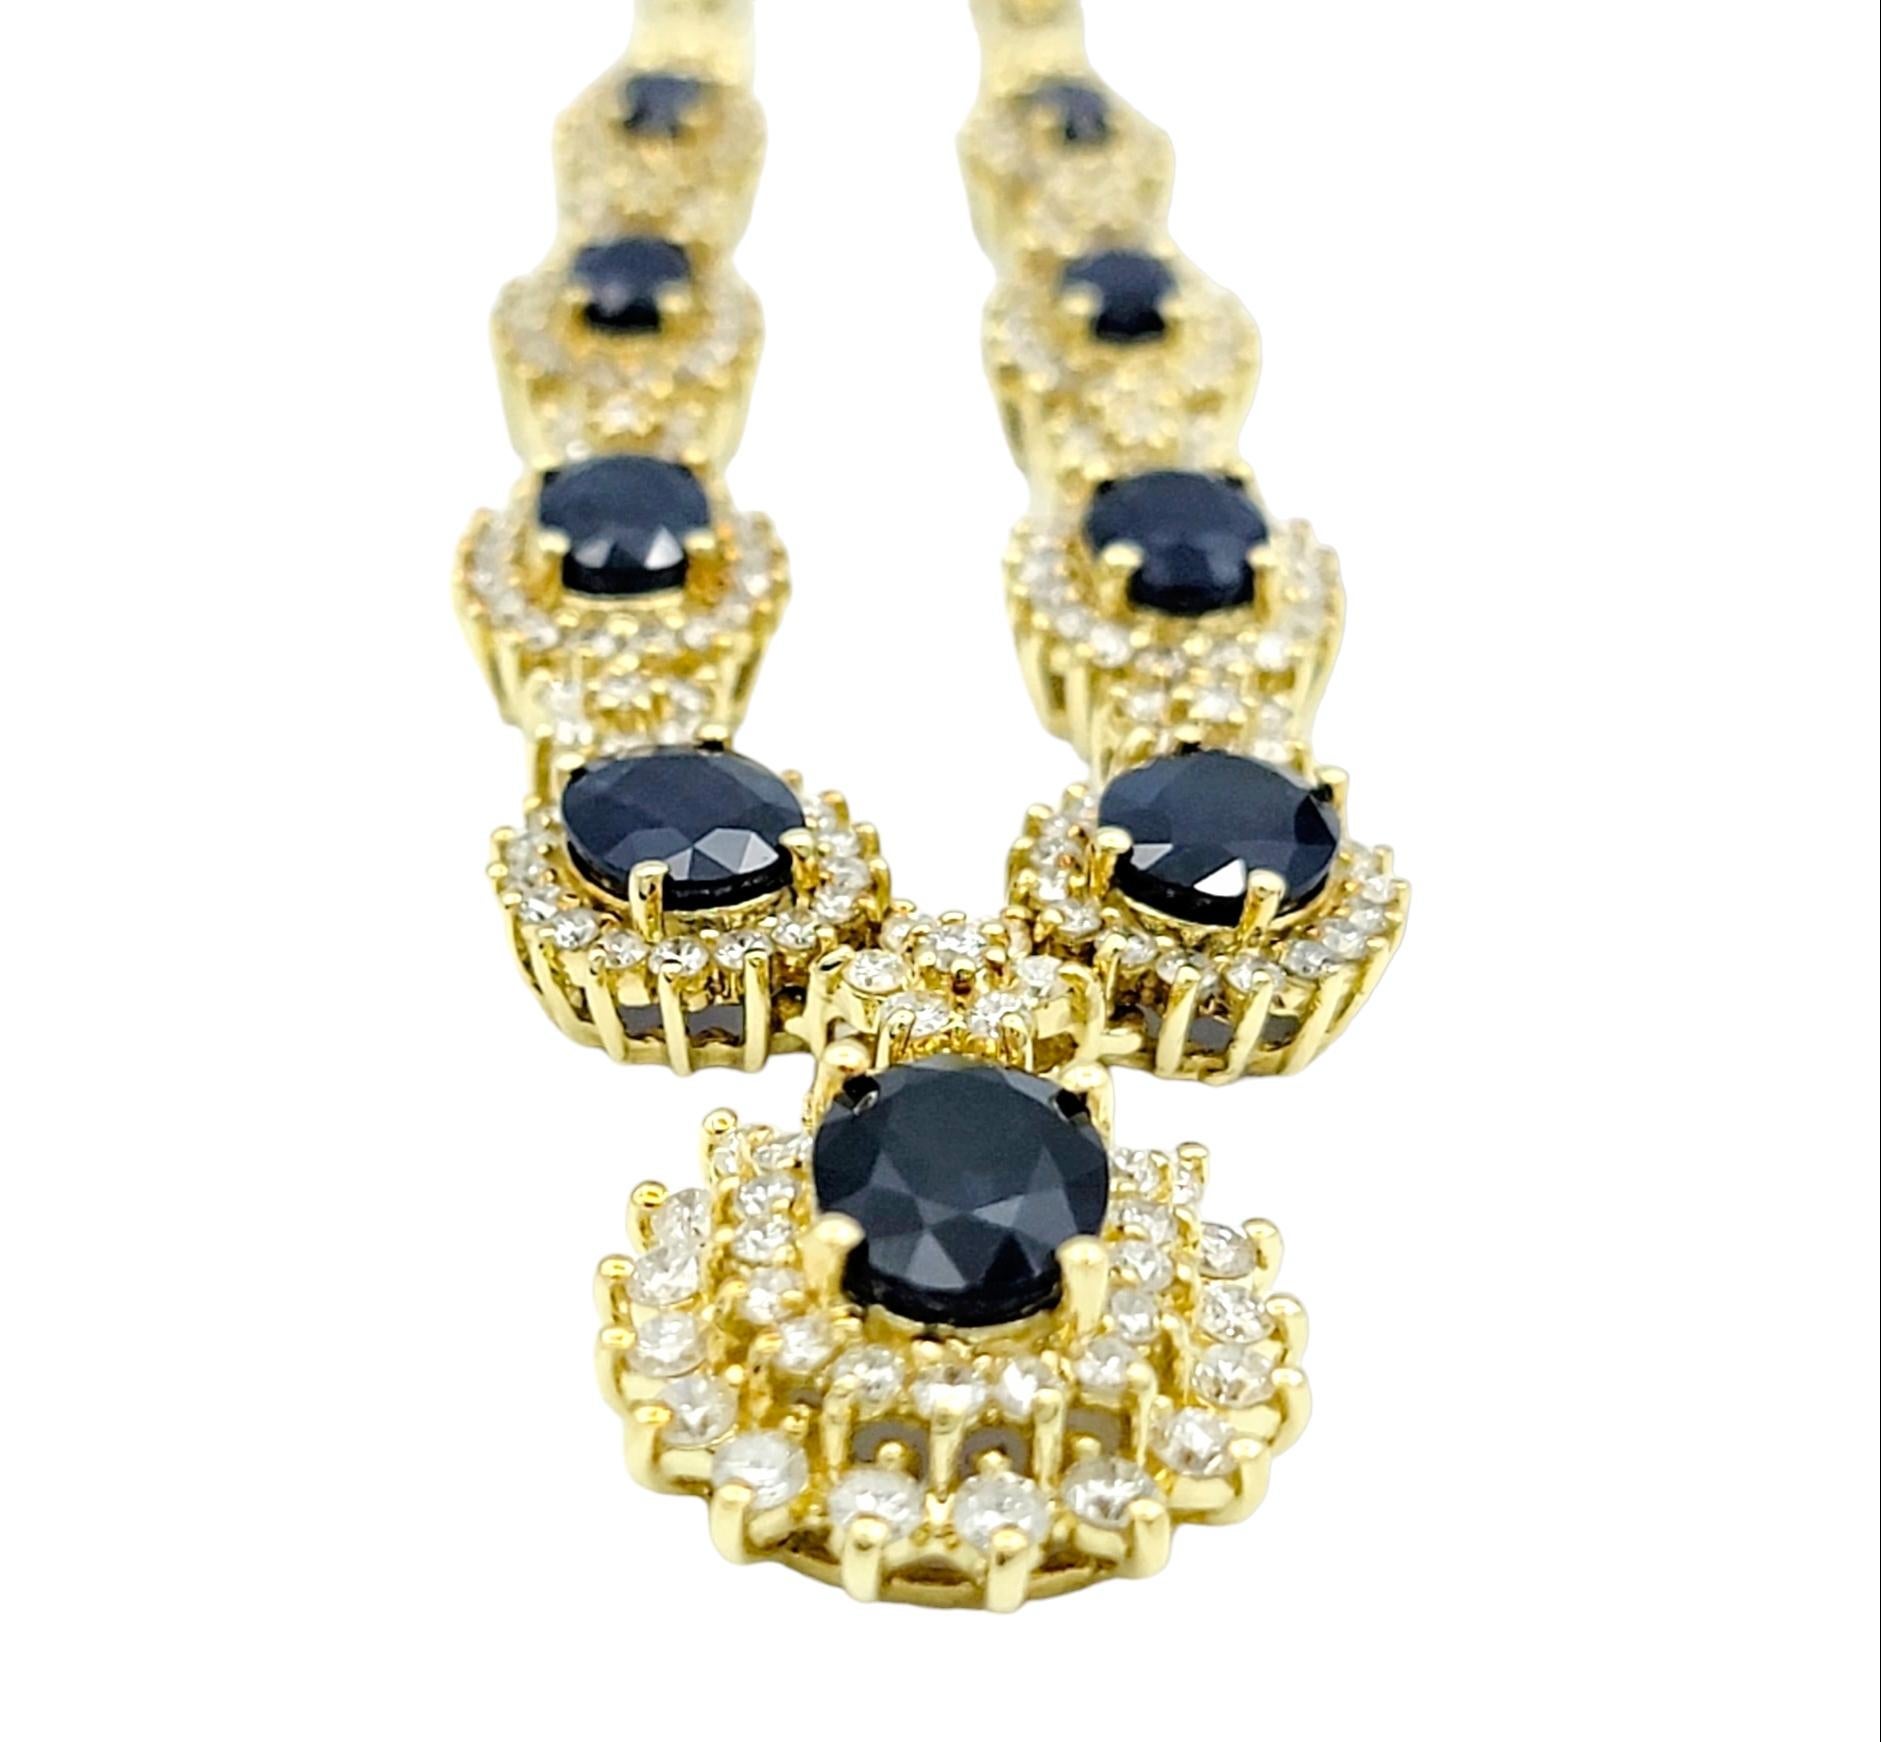 Contemporary Hammerman Brothers Blue Sapphire and Diamond Necklace in 18 Karat Yellow Gold